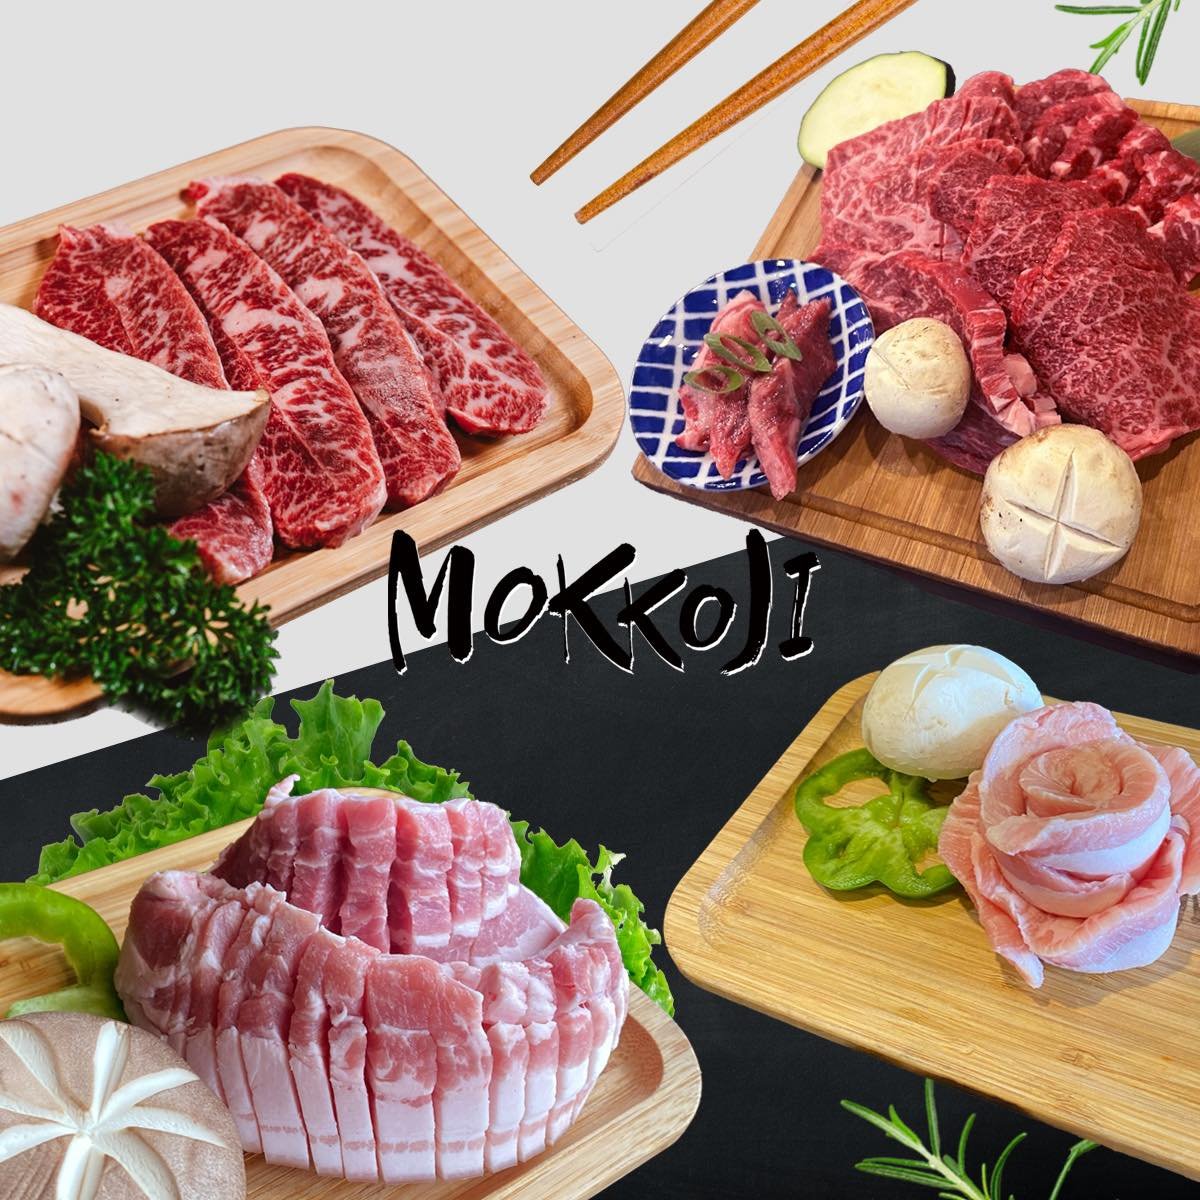 Pork or beef? Can&rsquo;t decide? We even have a wagyu and pork set if you love both. Bookings are highly recommended on the weekends .

🥩 Mokkoji Korean BBQ | Authentic Korean BBQ
⏰ Mon-Fri 4:30pm-12:00am
 Sat-Sun 11:30am-12:00am 
(break 2:30-4:30,